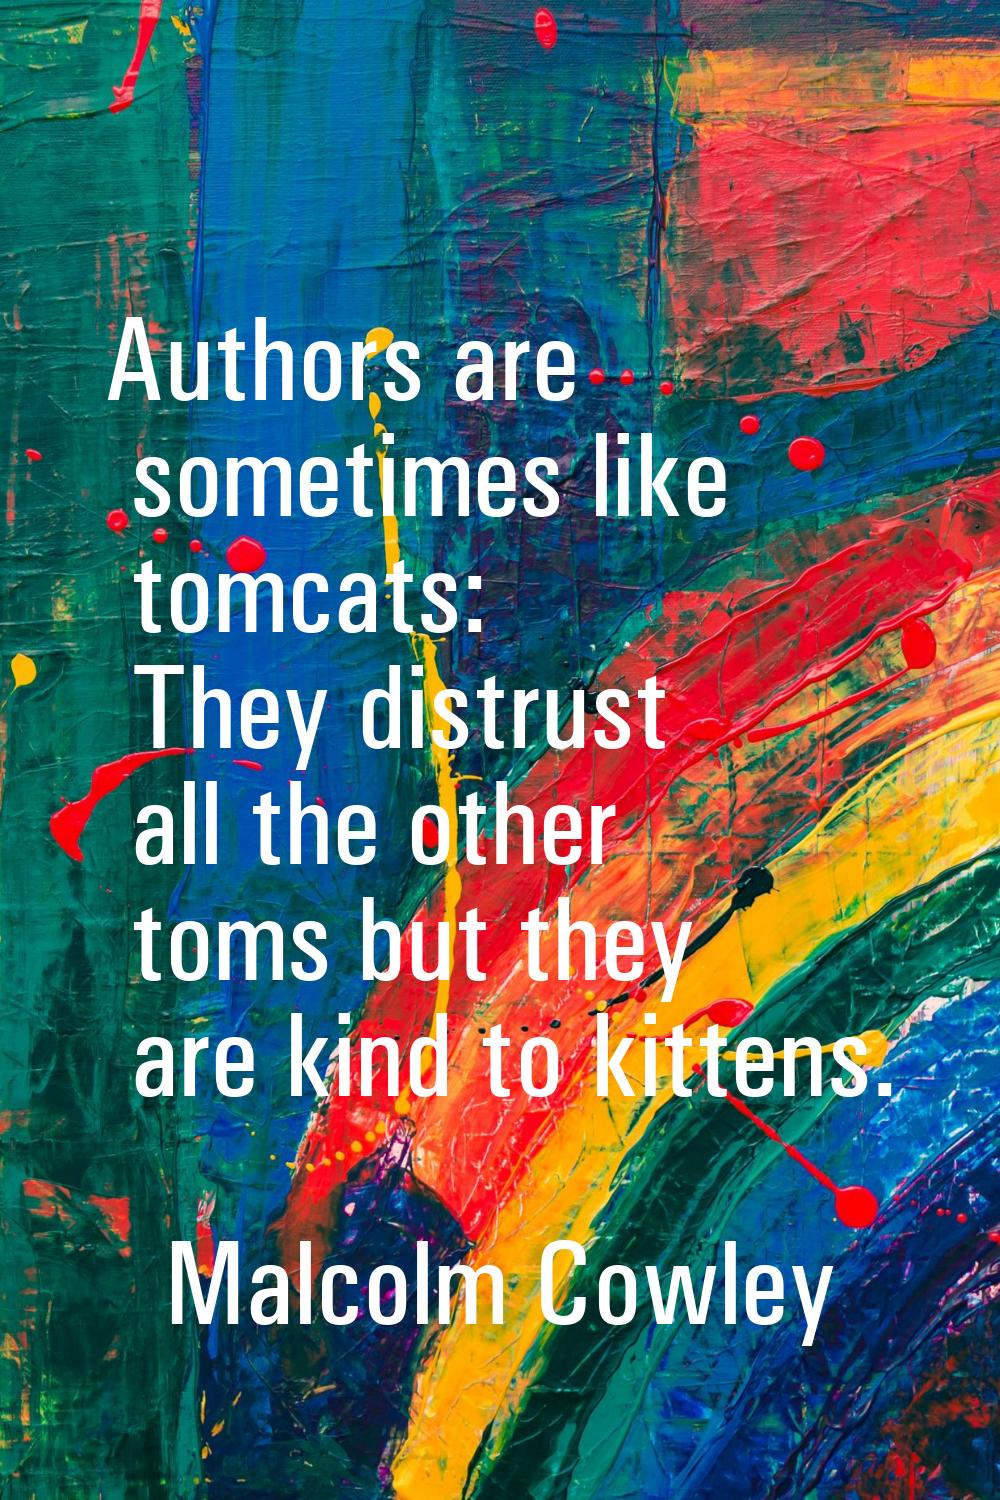 Authors are sometimes like tomcats: They distrust all the other toms but they are kind to kittens.